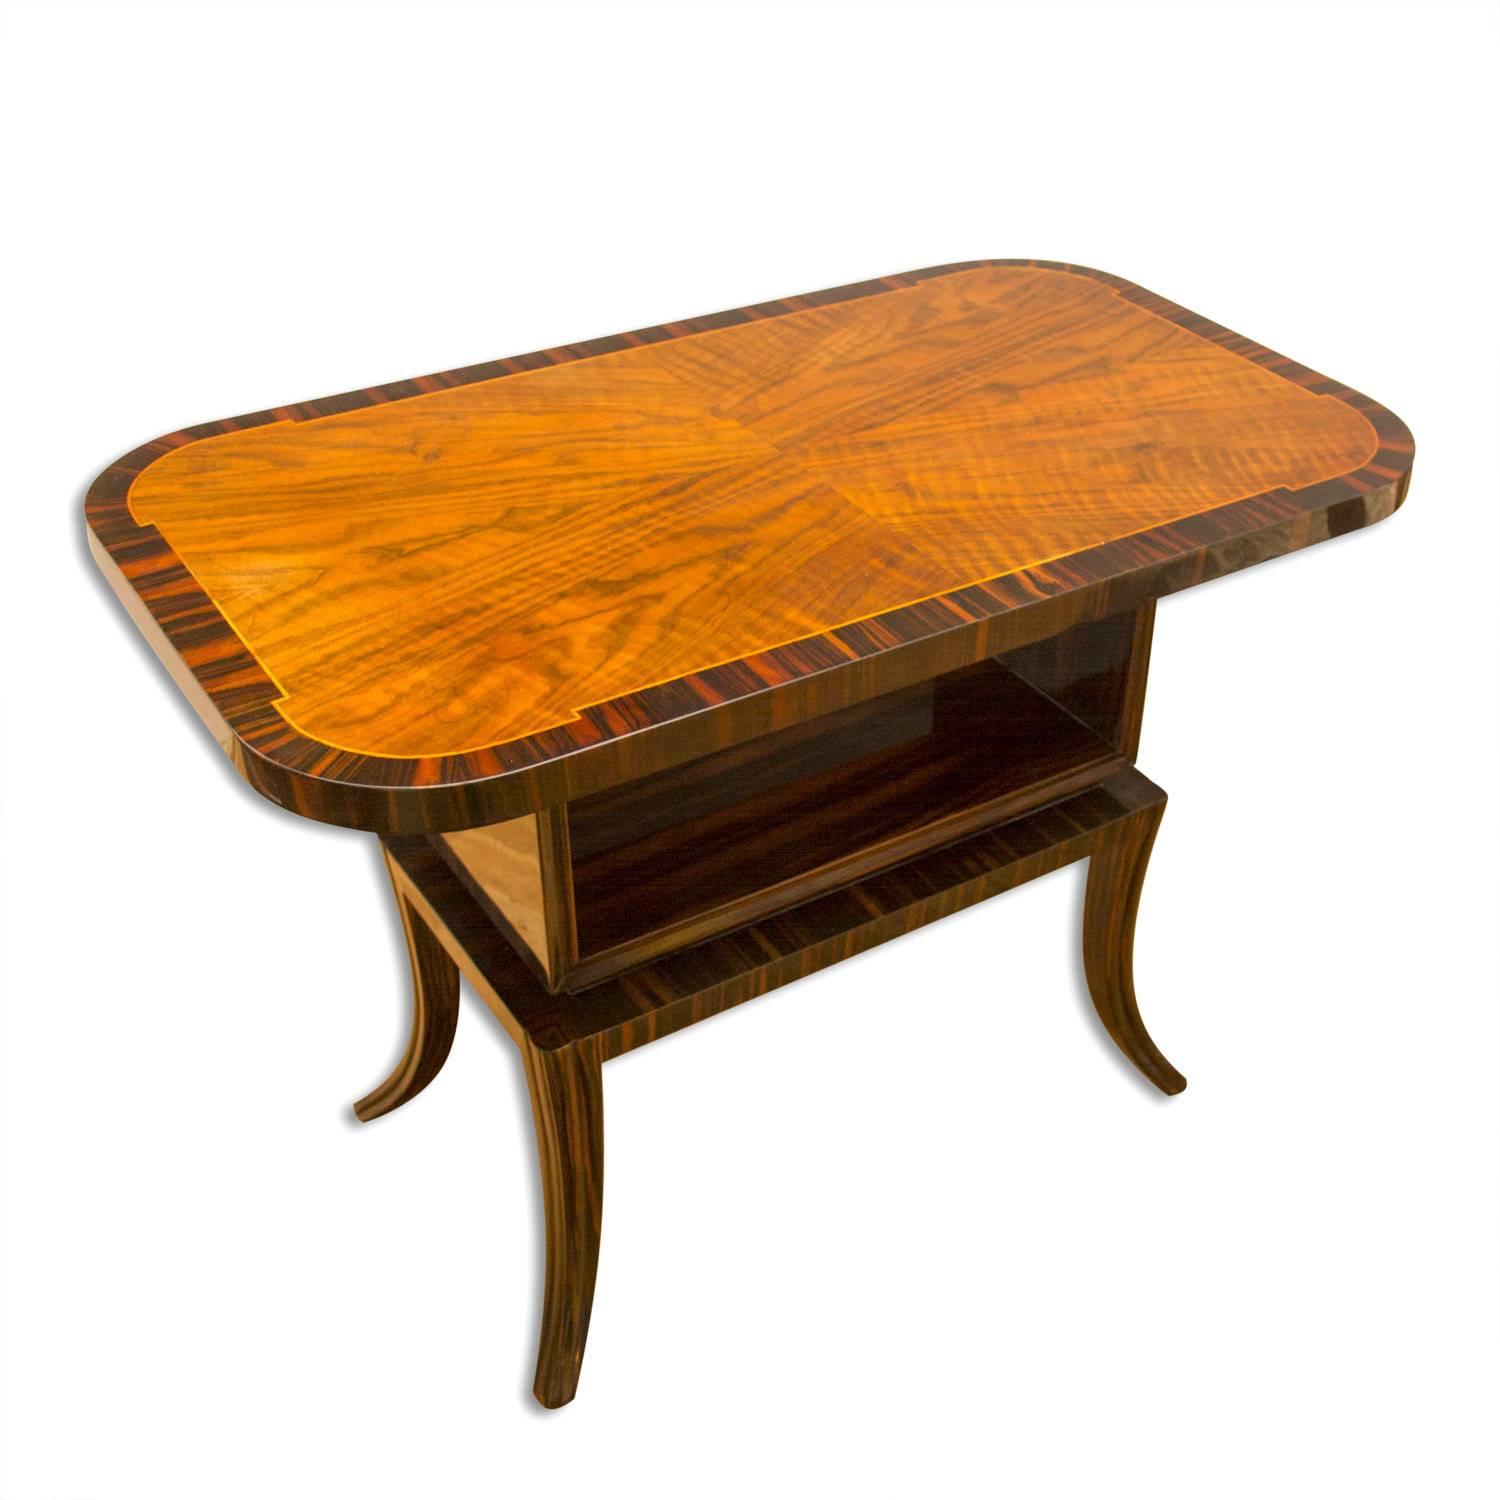 German Macassar Ebony and Walnut Coffee Table, 1930s, Central Europe For Sale